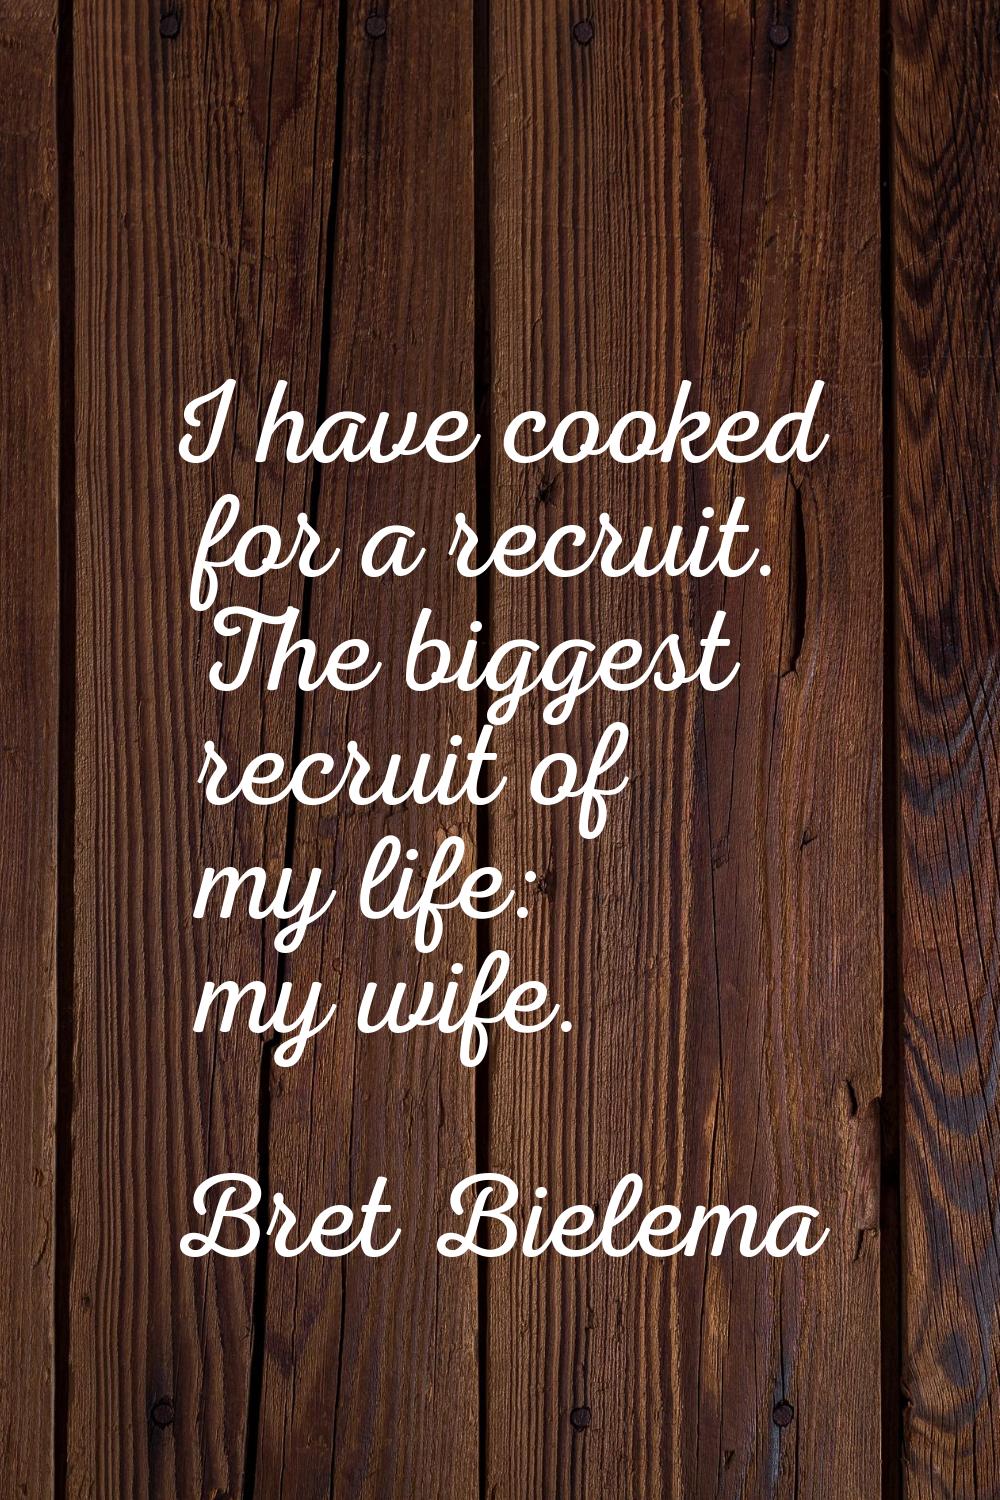 I have cooked for a recruit. The biggest recruit of my life: my wife.